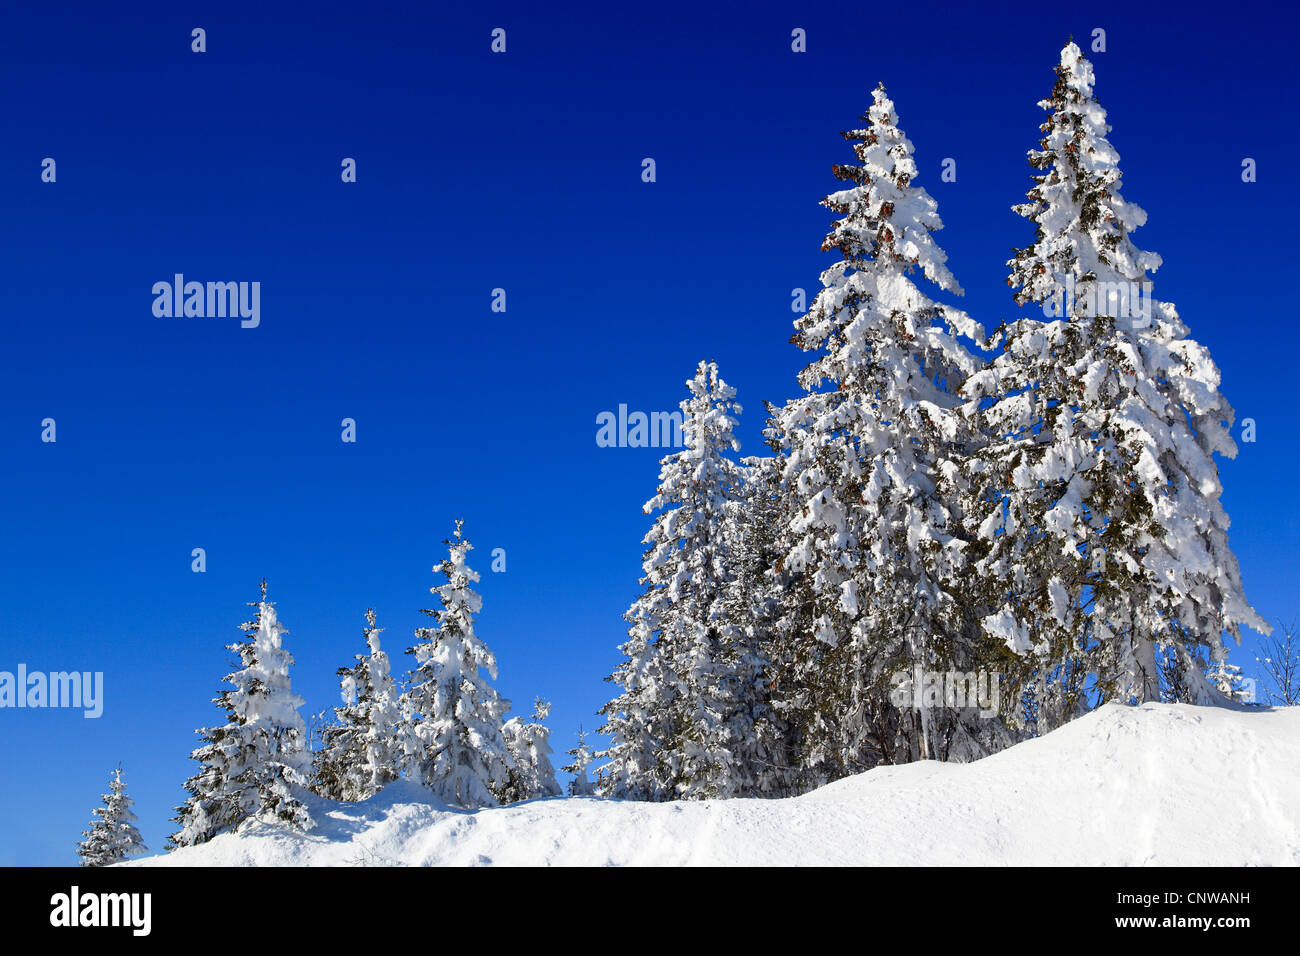 Norway spruce (Picea abies), snow-covered spruces in the foothills of the Alps, Switzerland, Gurnigel Stock Photo